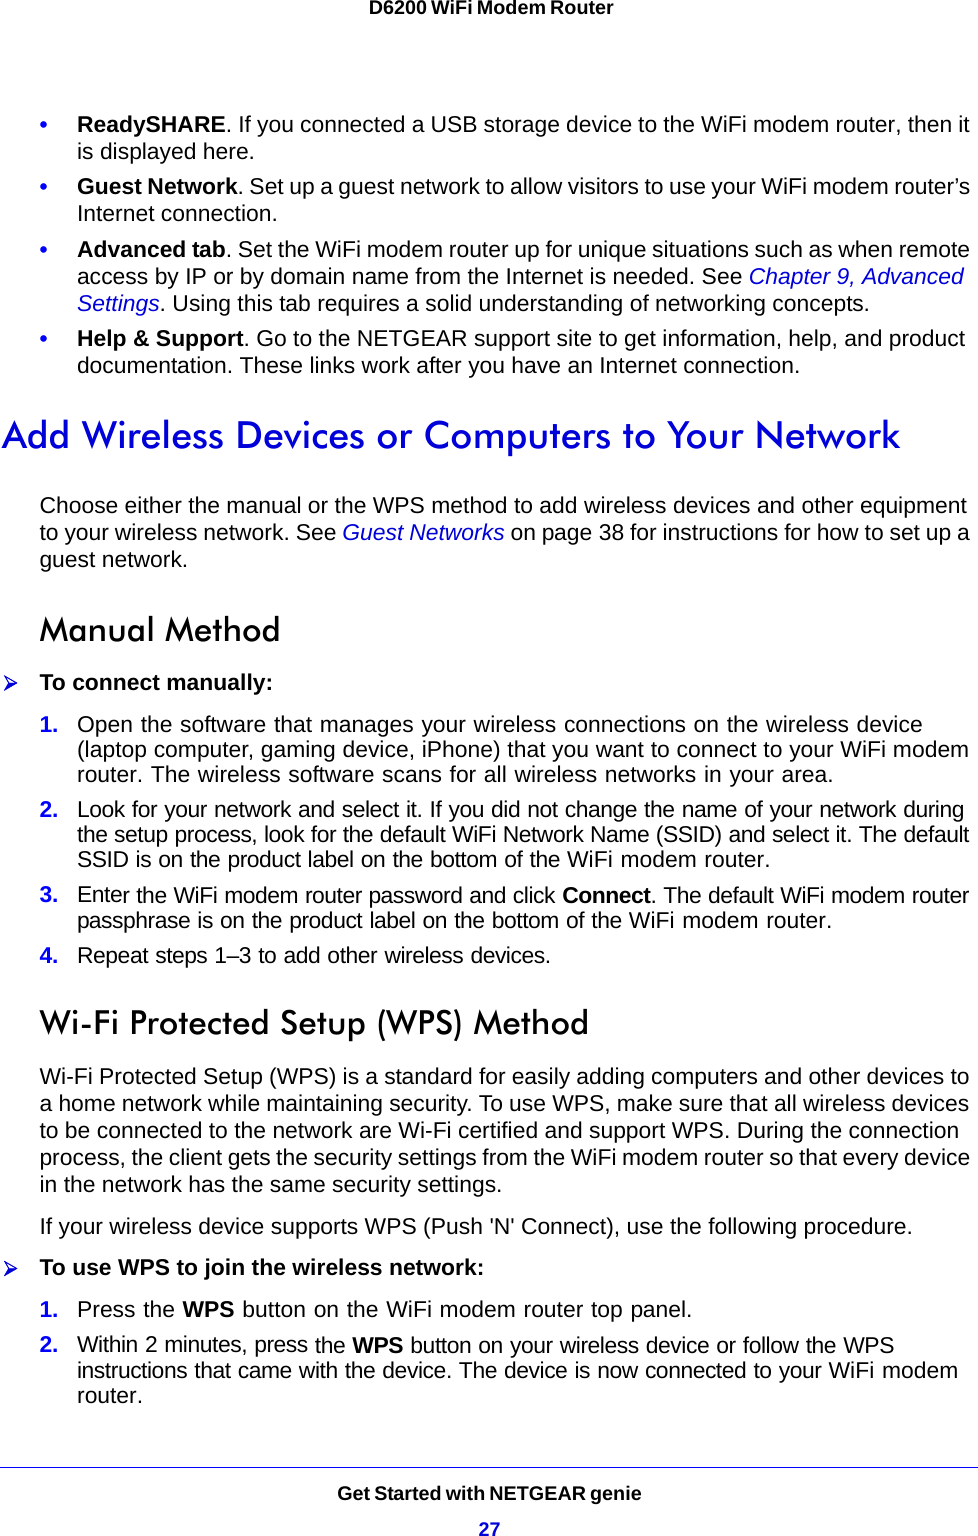 Get Started with NETGEAR genie27 D6200 WiFi Modem Router•ReadySHARE. If you connected a USB storage device to the WiFi modem router, then it is displayed here.•Guest Network. Set up a guest network to allow visitors to use your WiFi modem router’s Internet connection.•Advanced tab. Set the WiFi modem router up for unique situations such as when remote access by IP or by domain name from the Internet is needed. See Chapter 9, Advanced Settings. Using this tab requires a solid understanding of networking concepts.•Help &amp; Support. Go to the NETGEAR support site to get information, help, and product documentation. These links work after you have an Internet connection.Add Wireless Devices or Computers to Your NetworkChoose either the manual or the WPS method to add wireless devices and other equipment to your wireless network. See Guest Networks on page 38 for instructions for how to set up a guest network.Manual MethodTo connect manually:1. Open the software that manages your wireless connections on the wireless device (laptop computer, gaming device, iPhone) that you want to connect to your WiFi modem router. The wireless software scans for all wireless networks in your area.2. Look for your network and select it. If you did not change the name of your network during the setup process, look for the default WiFi Network Name (SSID) and select it. The default SSID is on the product label on the bottom of the WiFi modem router.3. Enter the WiFi modem router password and click Connect. The default WiFi modem router passphrase is on the product label on the bottom of the WiFi modem router.4. Repeat steps 1–3 to add other wireless devices.Wi-Fi Protected Setup (WPS) MethodWi-Fi Protected Setup (WPS) is a standard for easily adding computers and other devices to a home network while maintaining security. To use WPS, make sure that all wireless devices to be connected to the network are Wi-Fi certified and support WPS. During the connection process, the client gets the security settings from the WiFi modem router so that every device in the network has the same security settings.If your wireless device supports WPS (Push &apos;N&apos; Connect), use the following procedure.To use WPS to join the wireless network:1. Press the WPS button on the WiFi modem router top panel.2. Within 2 minutes, press the WPS button on your wireless device or follow the WPS instructions that came with the device. The device is now connected to your WiFi modem router.